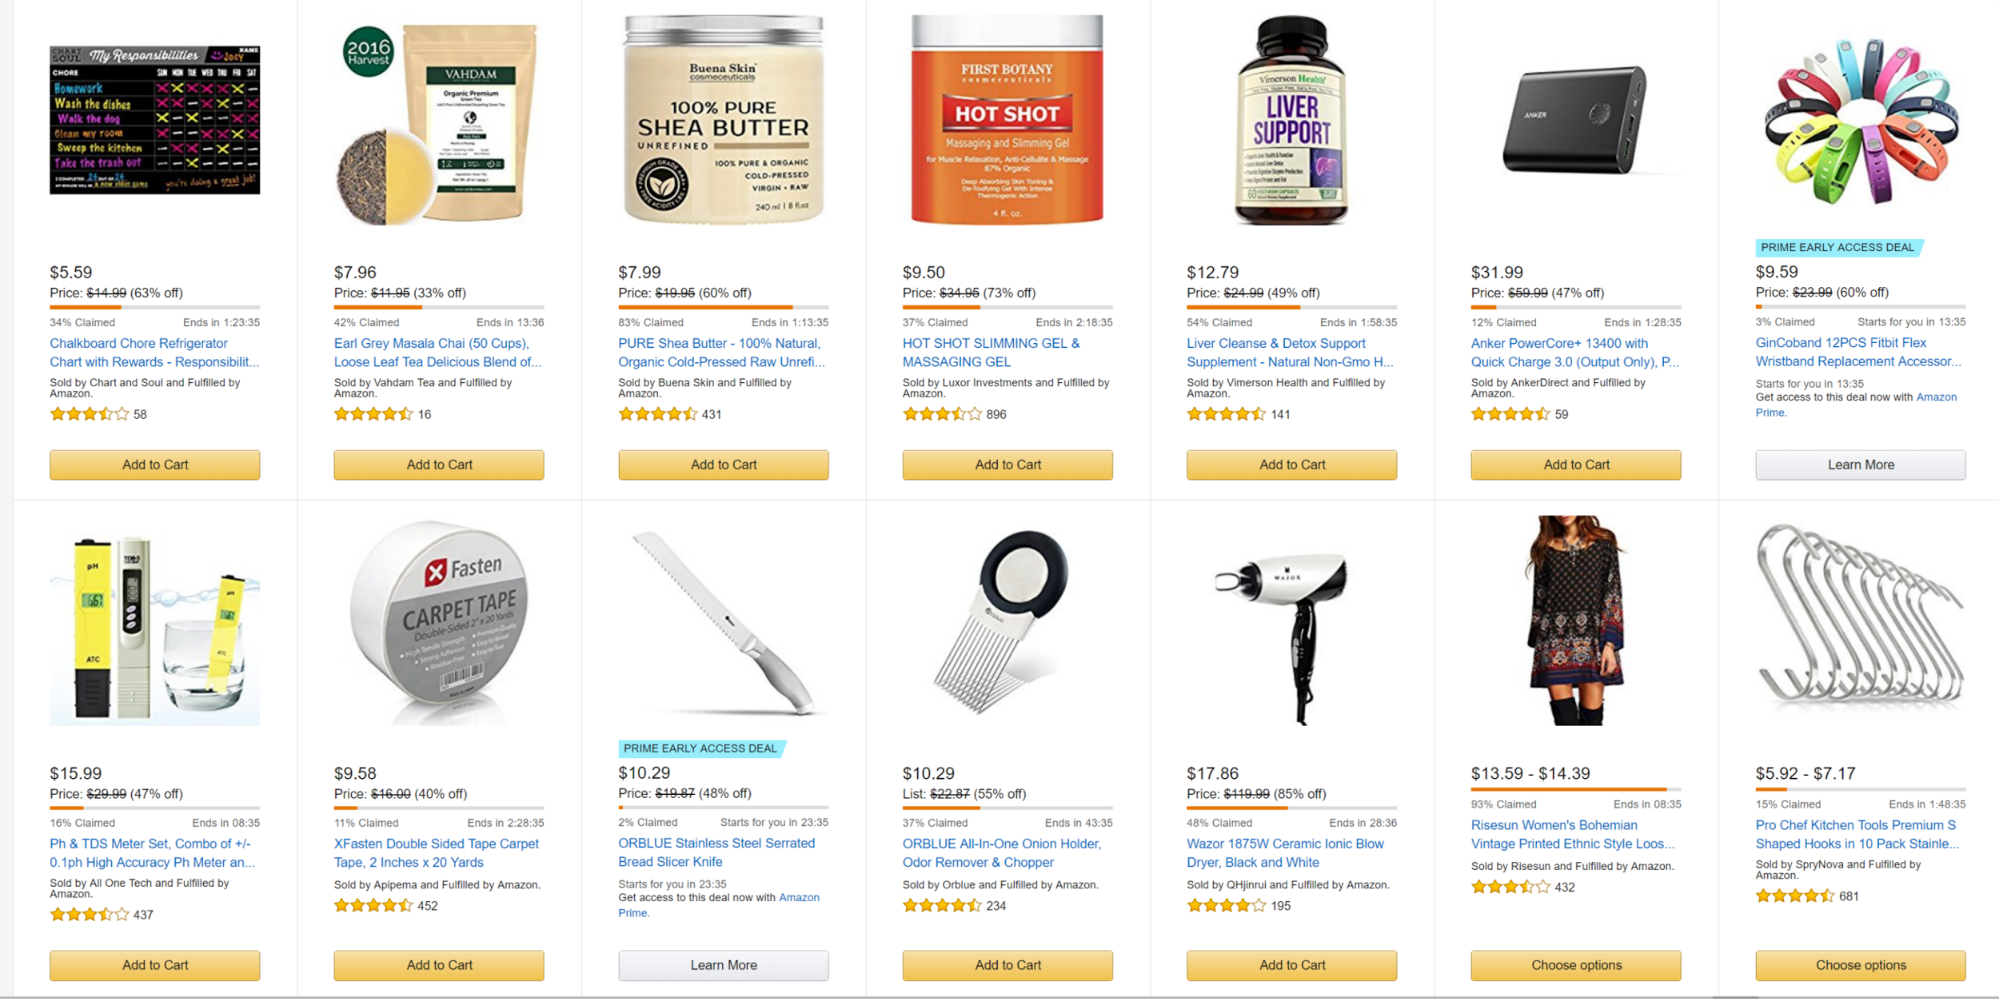 Top Selling Amazon Products in 2021 - How to Find Amazon Products